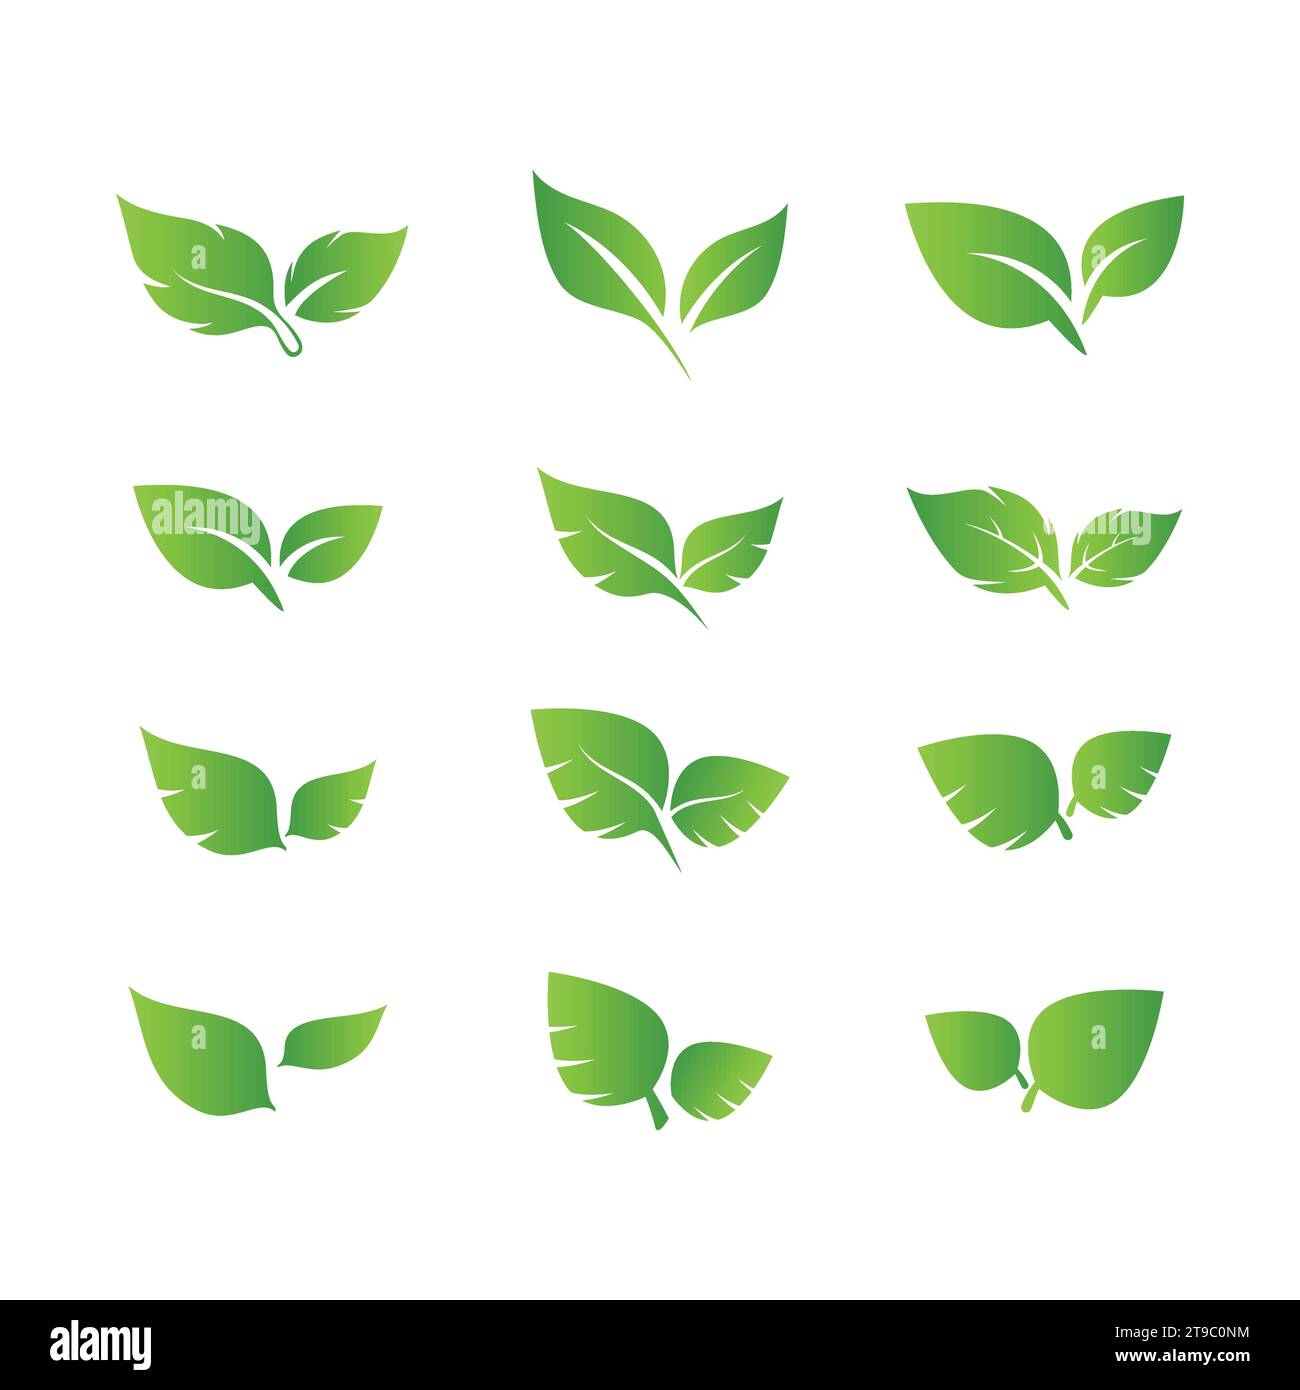 Set of different green leaf icons. Leaves icon. Leaves of trees and plants. Collection green leaf. Elements design for natural, eco, bio, vegan labels Stock Vector